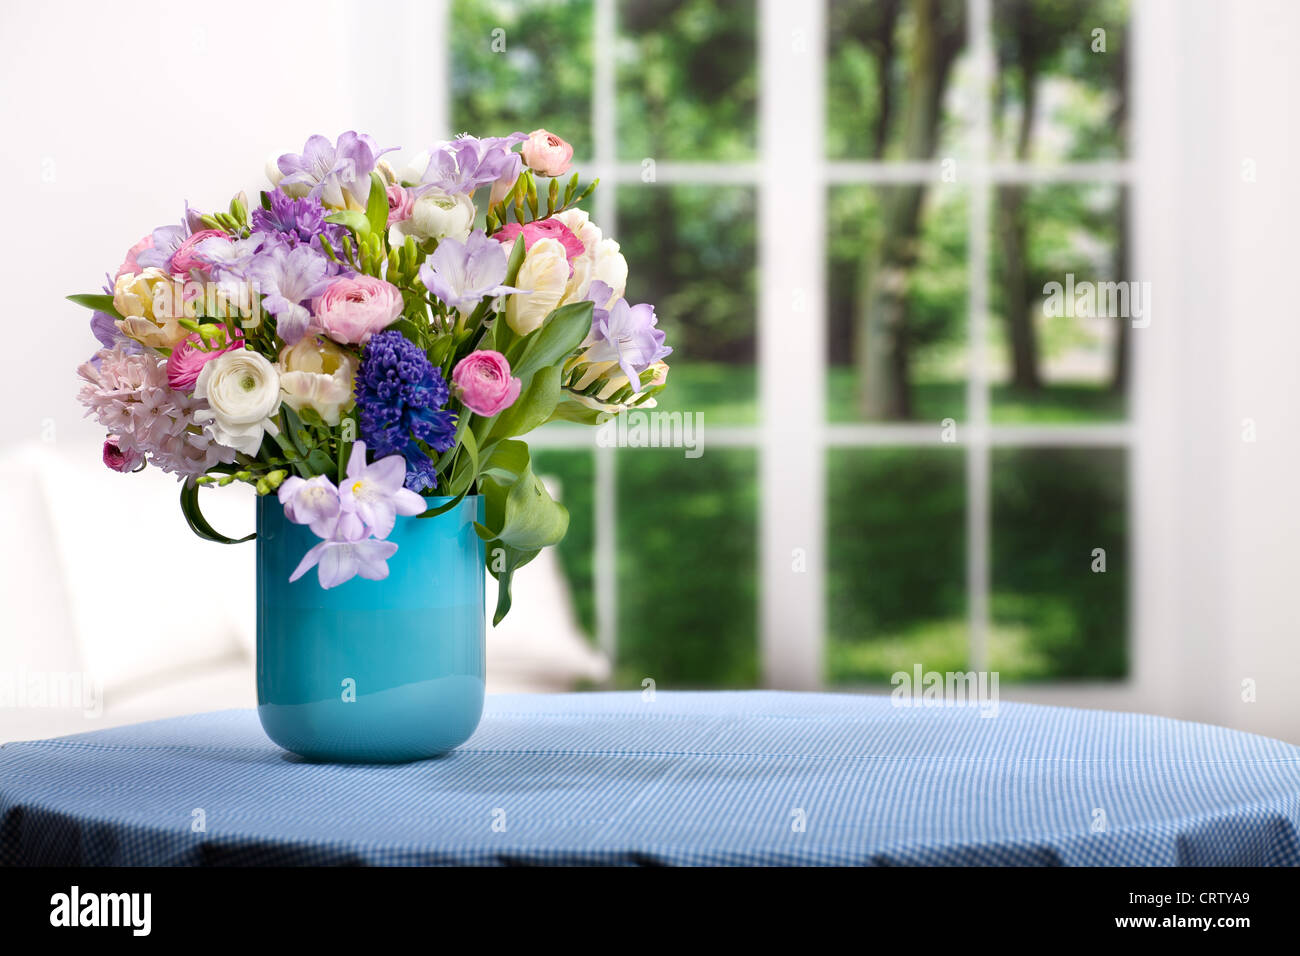 bunch of spring flowers Stock Photo